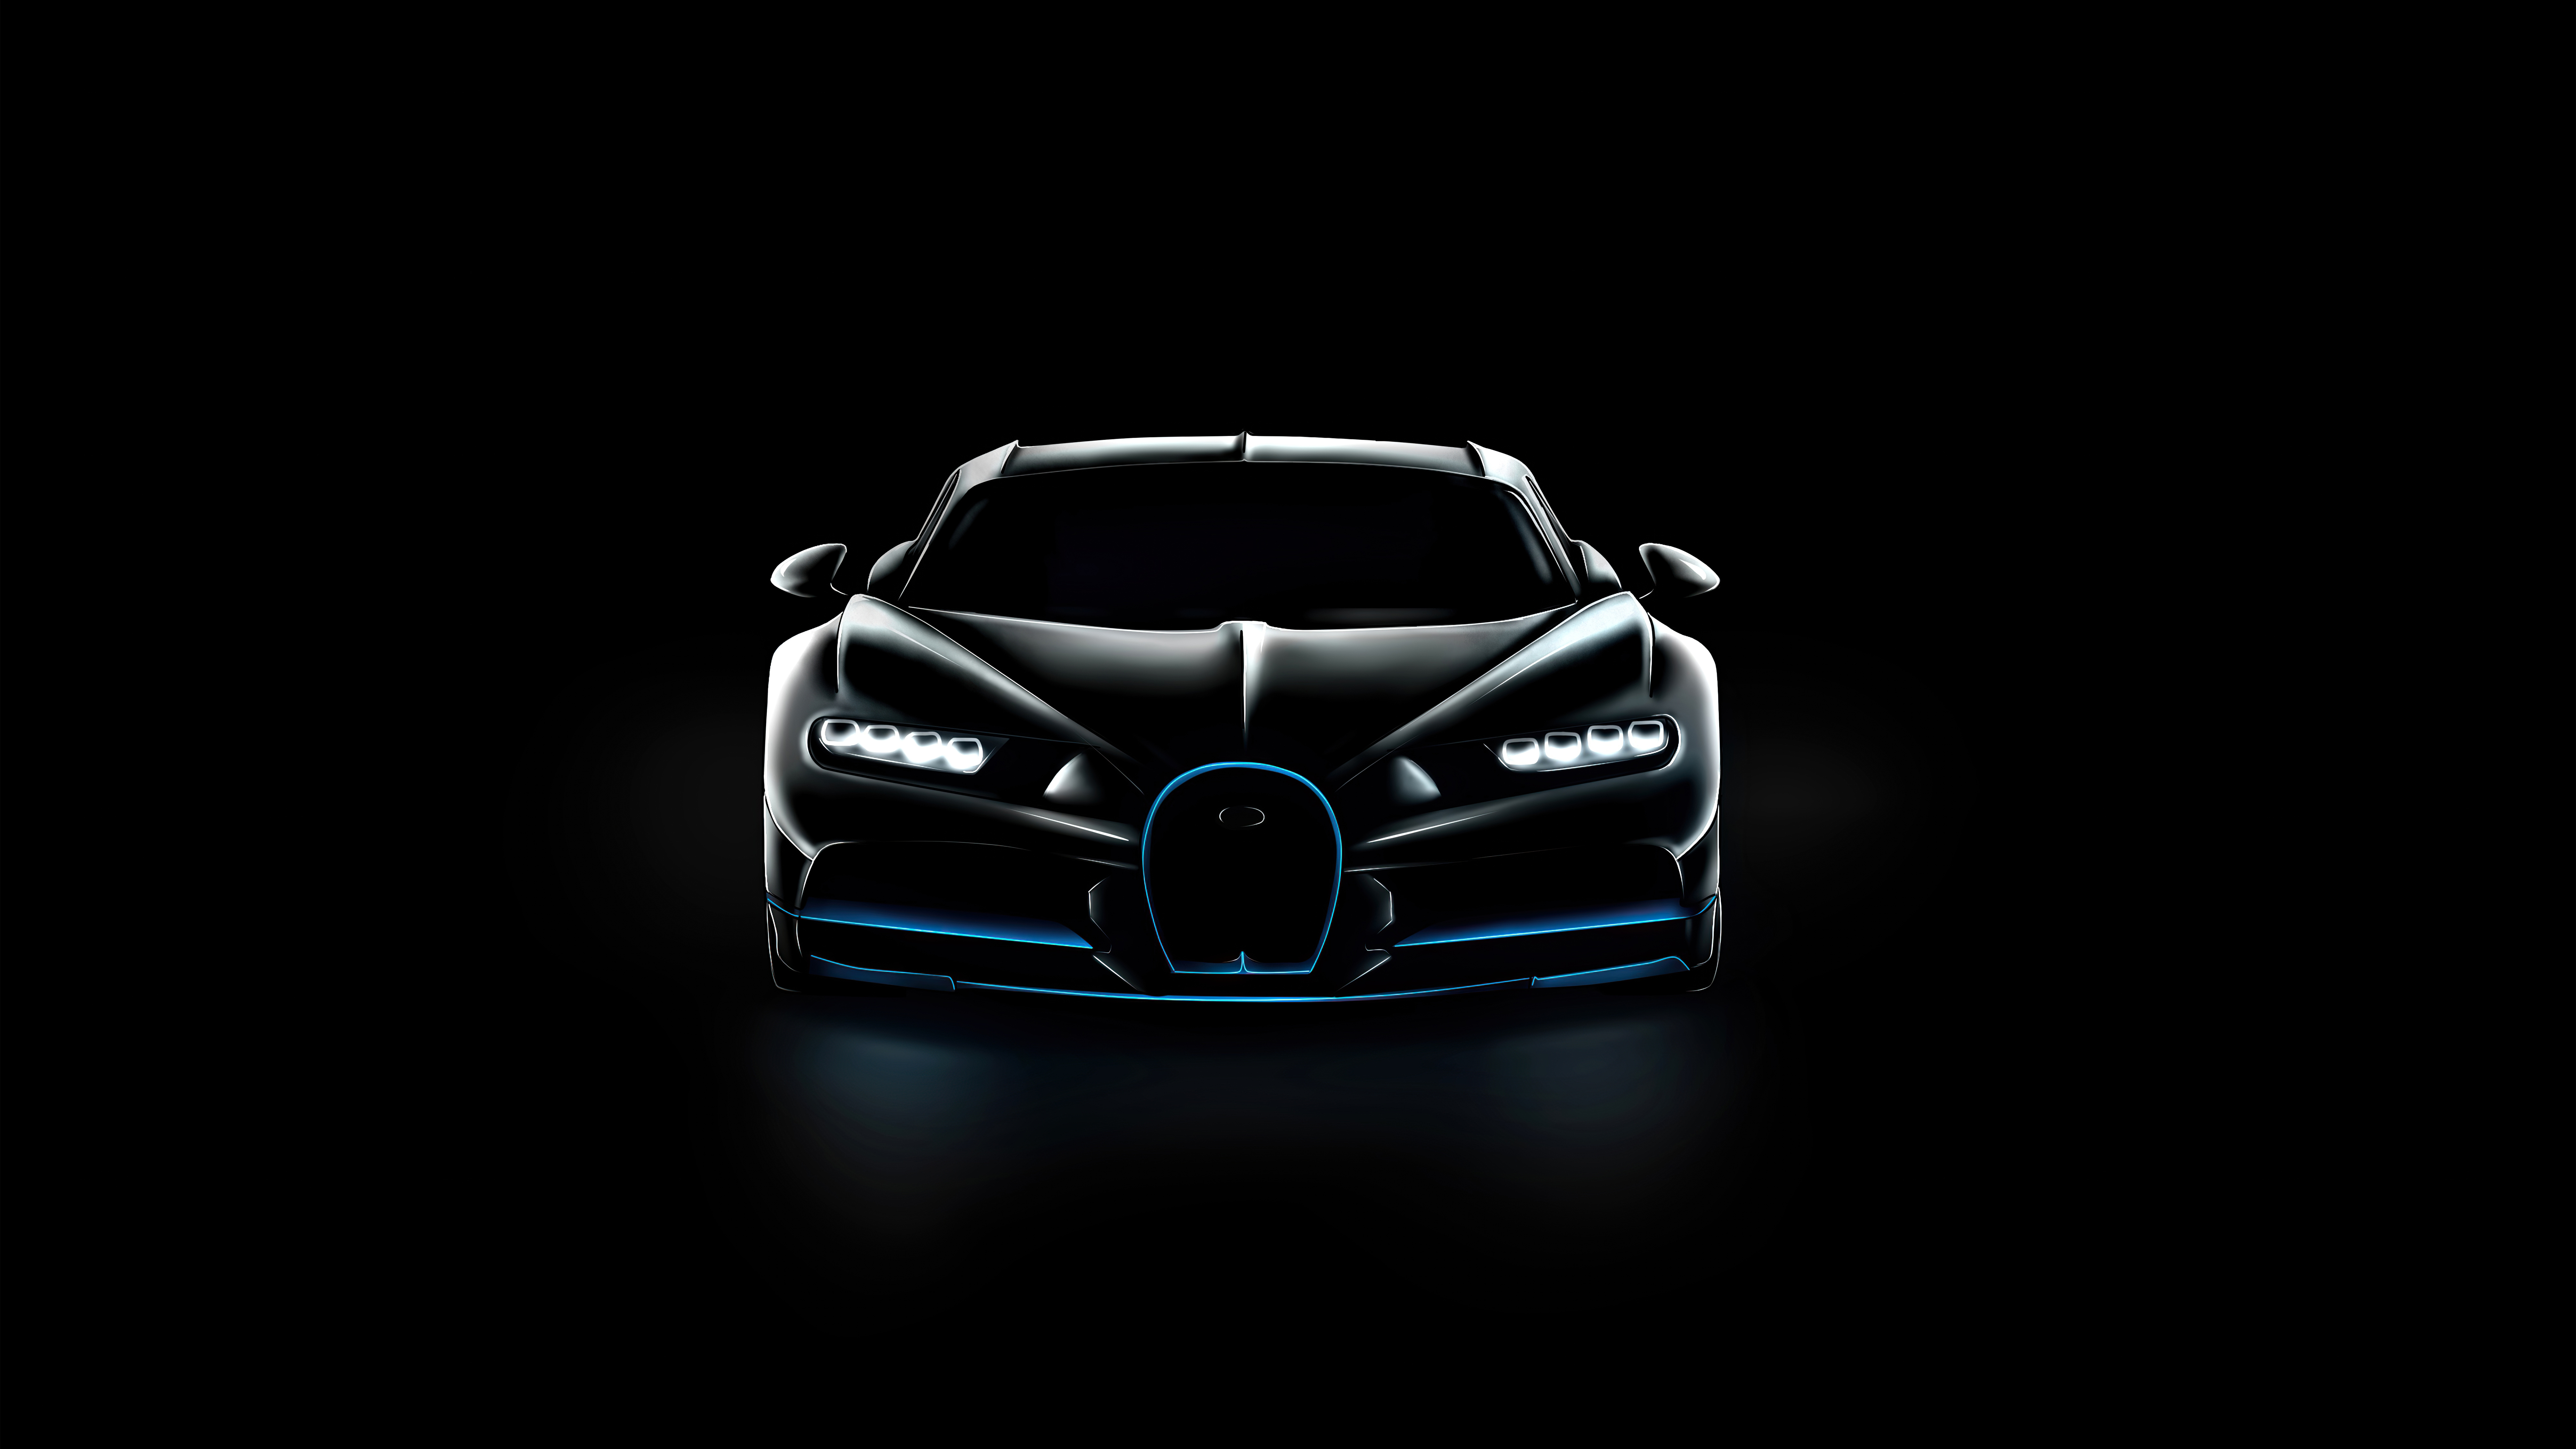 Discover more than 64 bugatti wallpapers best - in.cdgdbentre